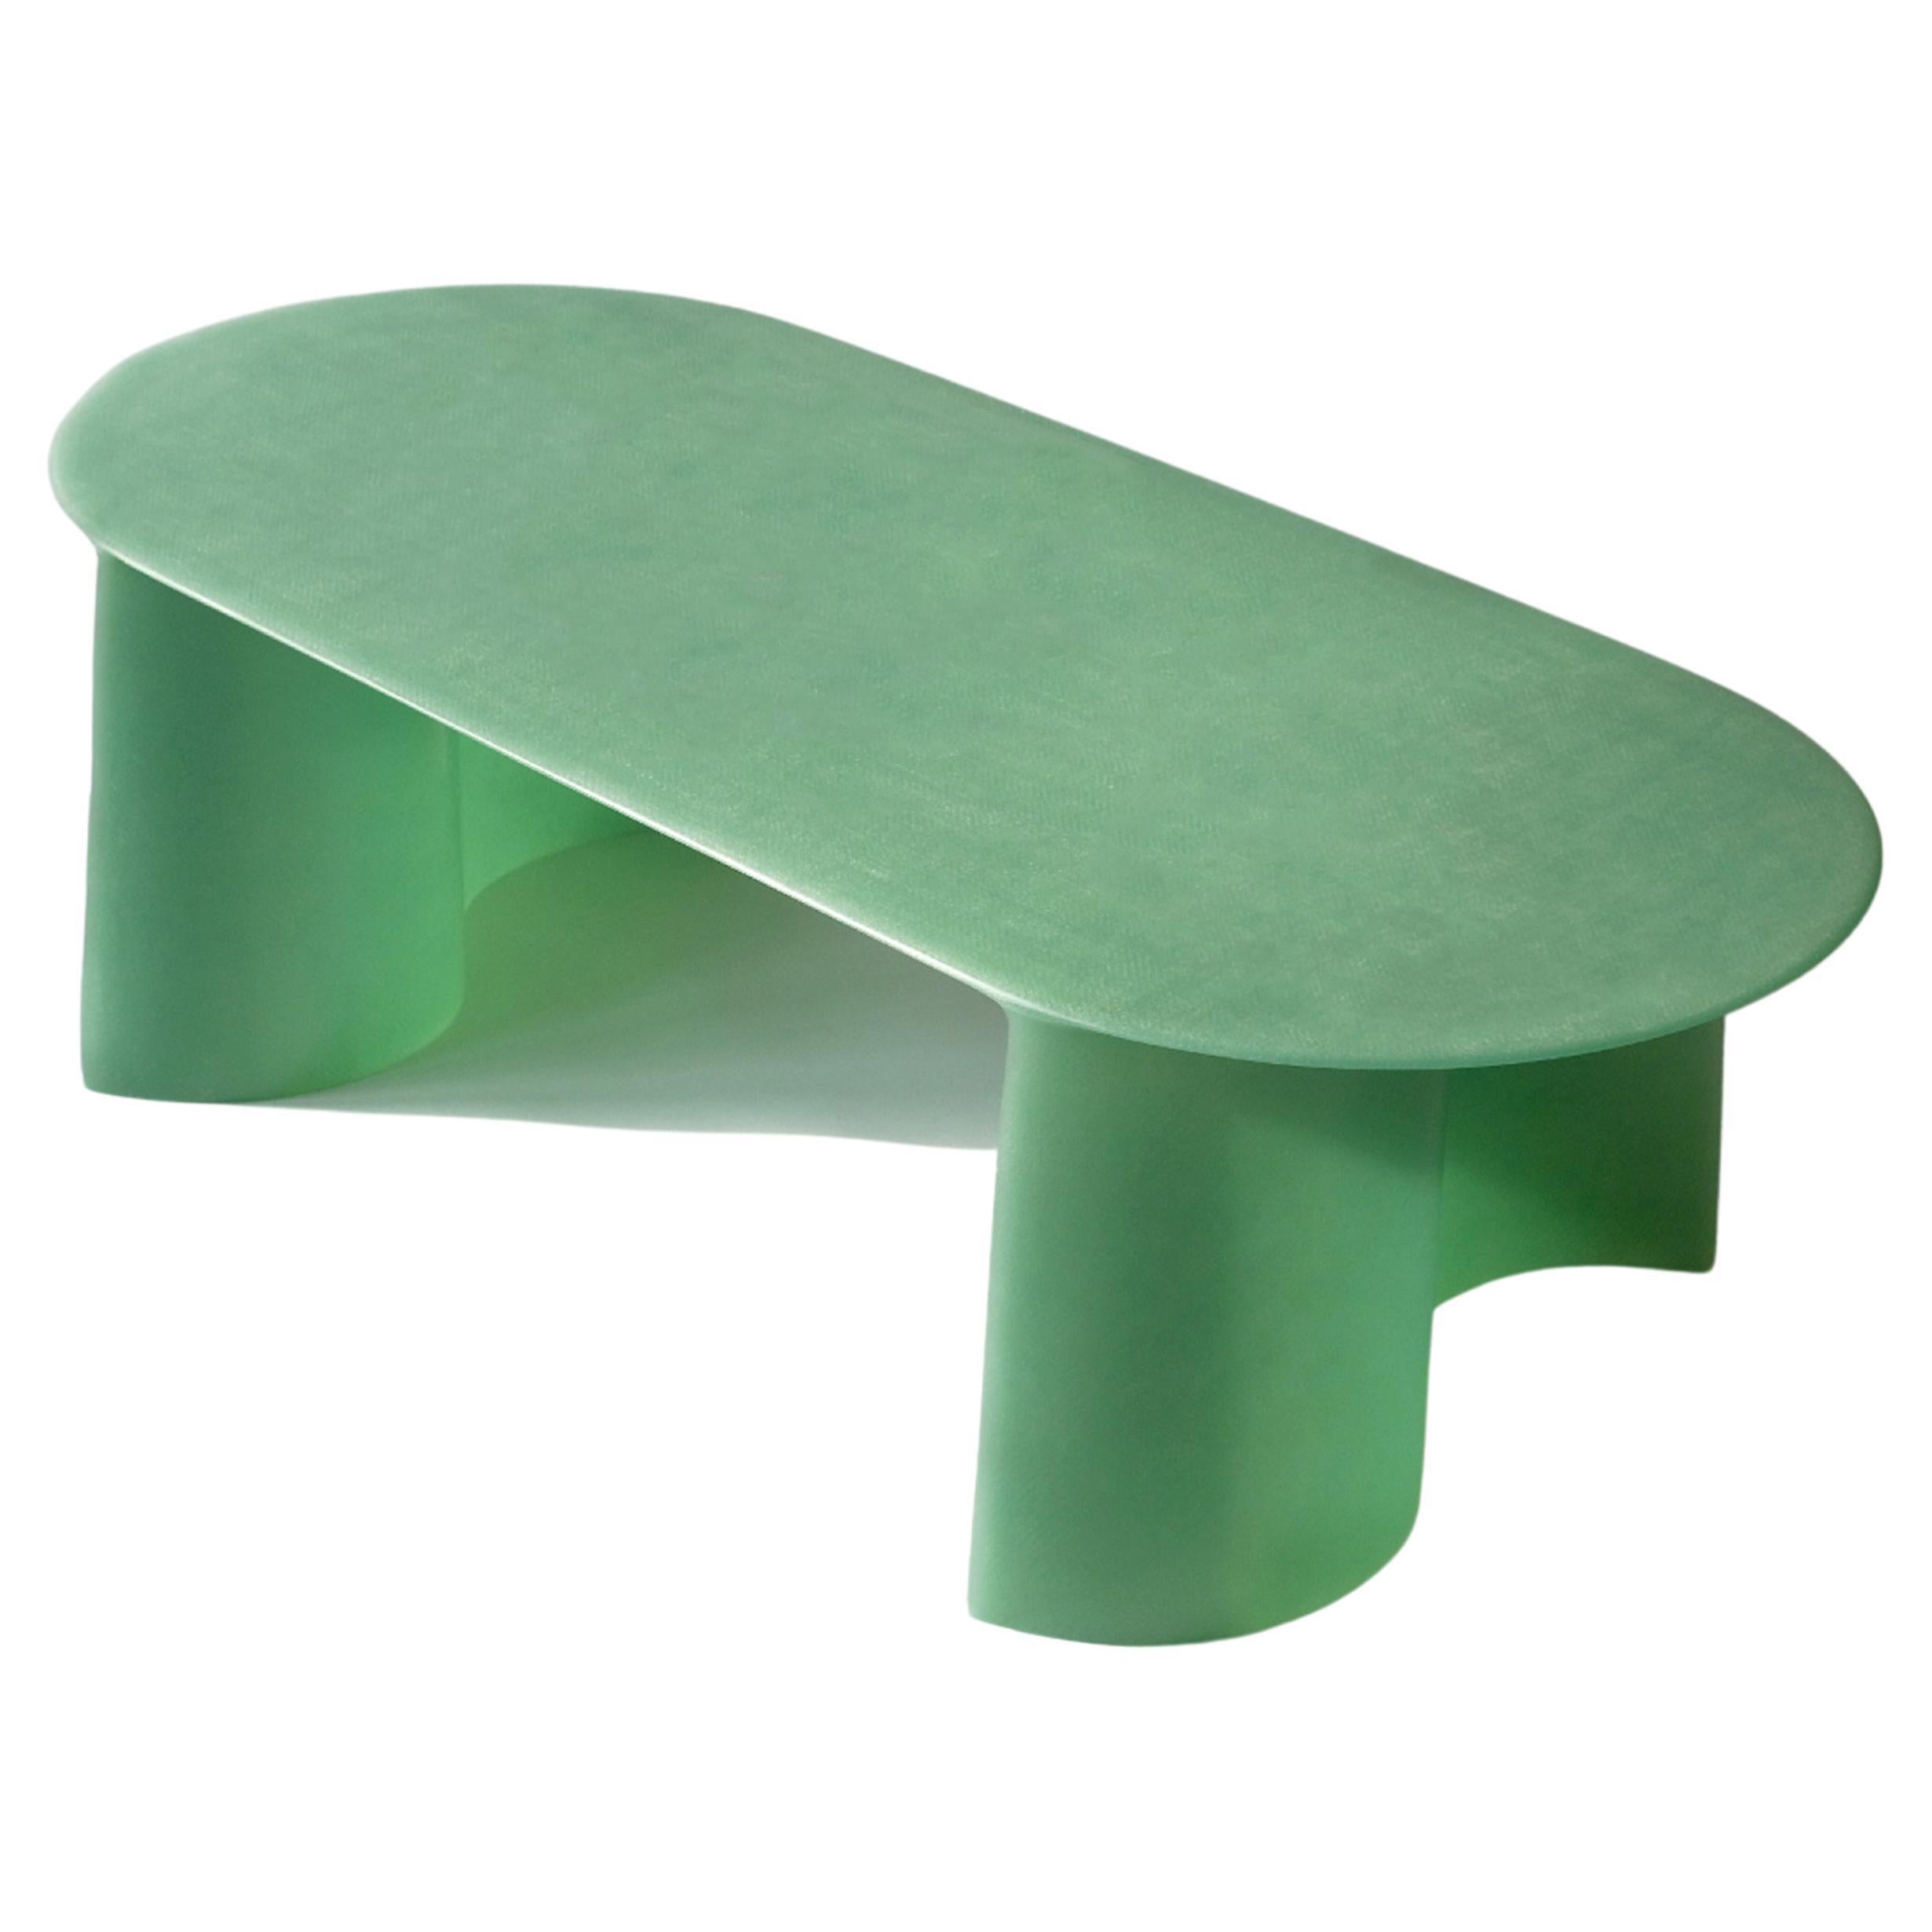 Contemporary Green Fiberglass, New Wave Coffee Table small, by Lukas Cober For Sale